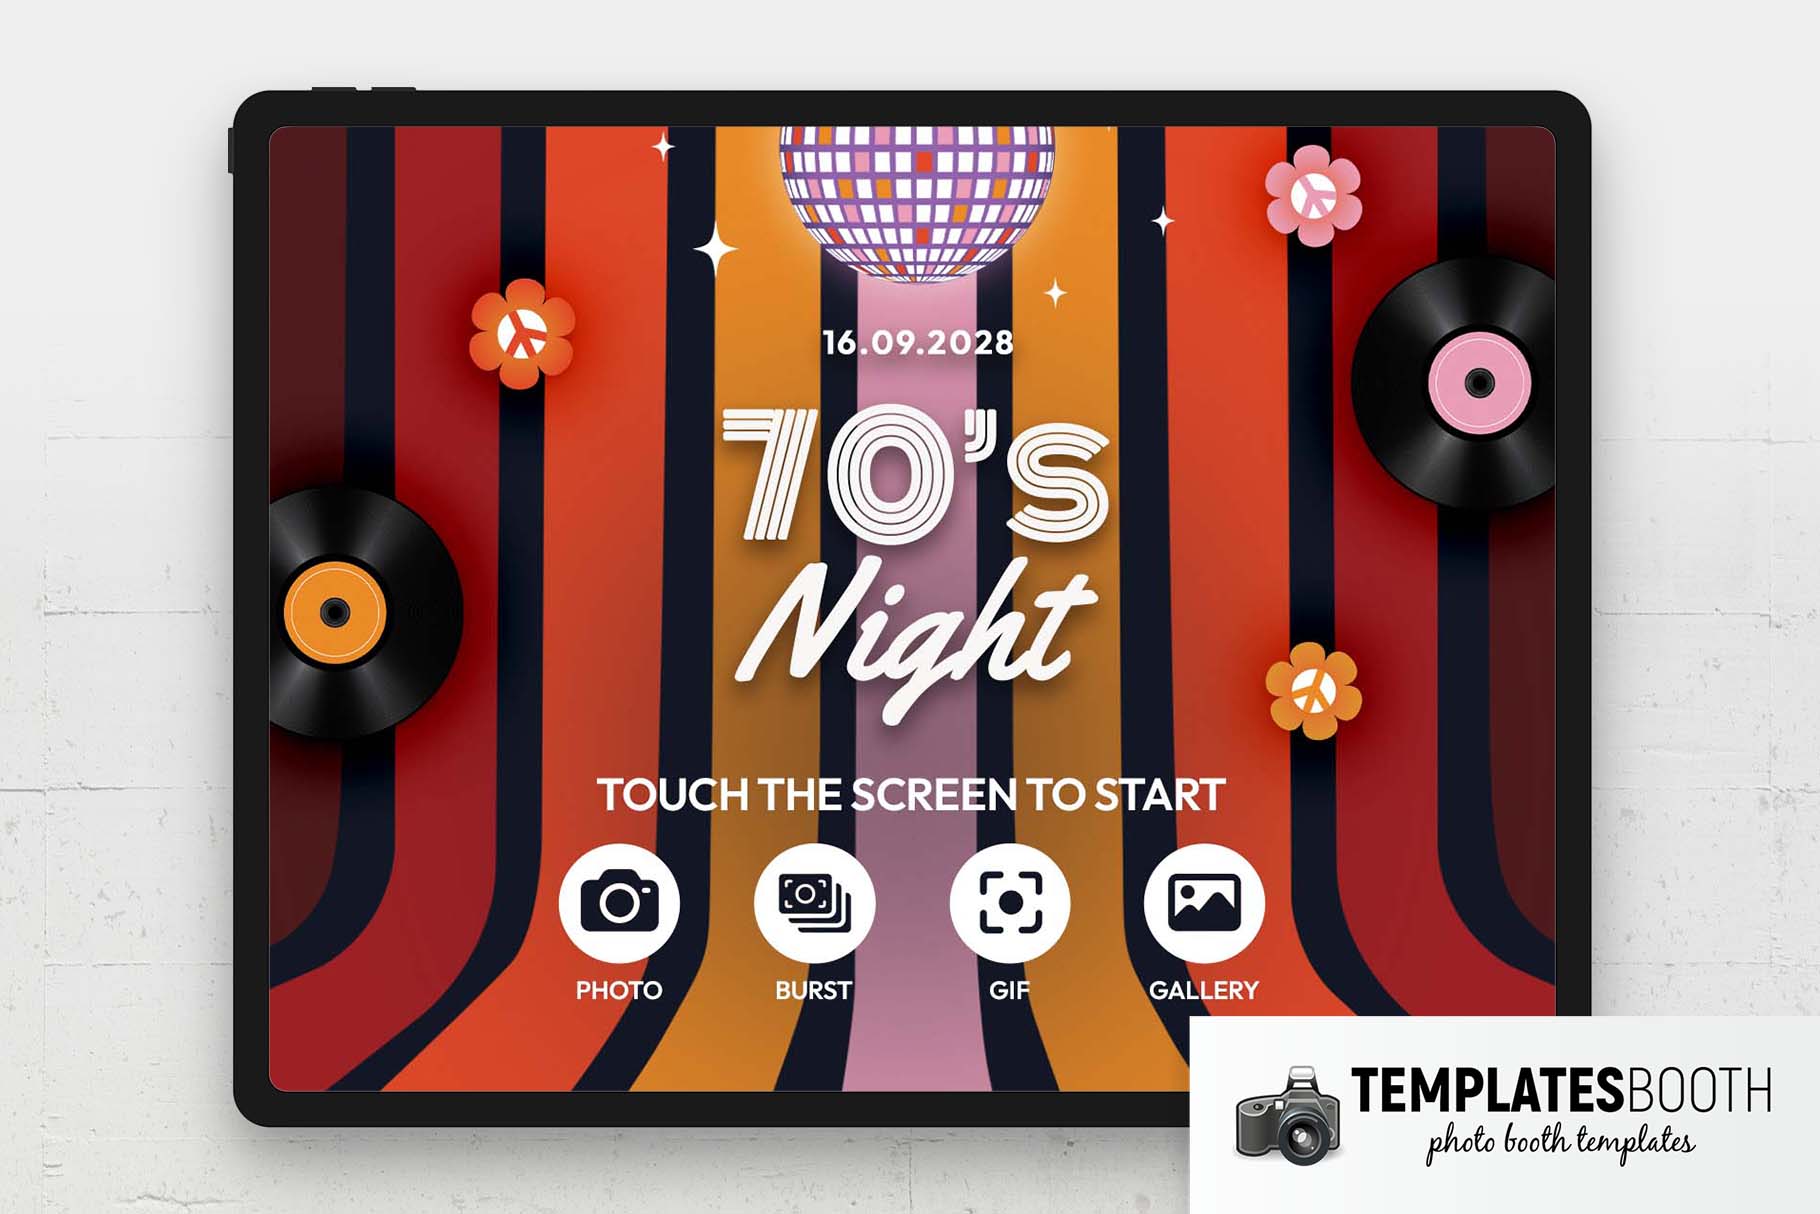 70s Night Photo Booth Welcome Screen